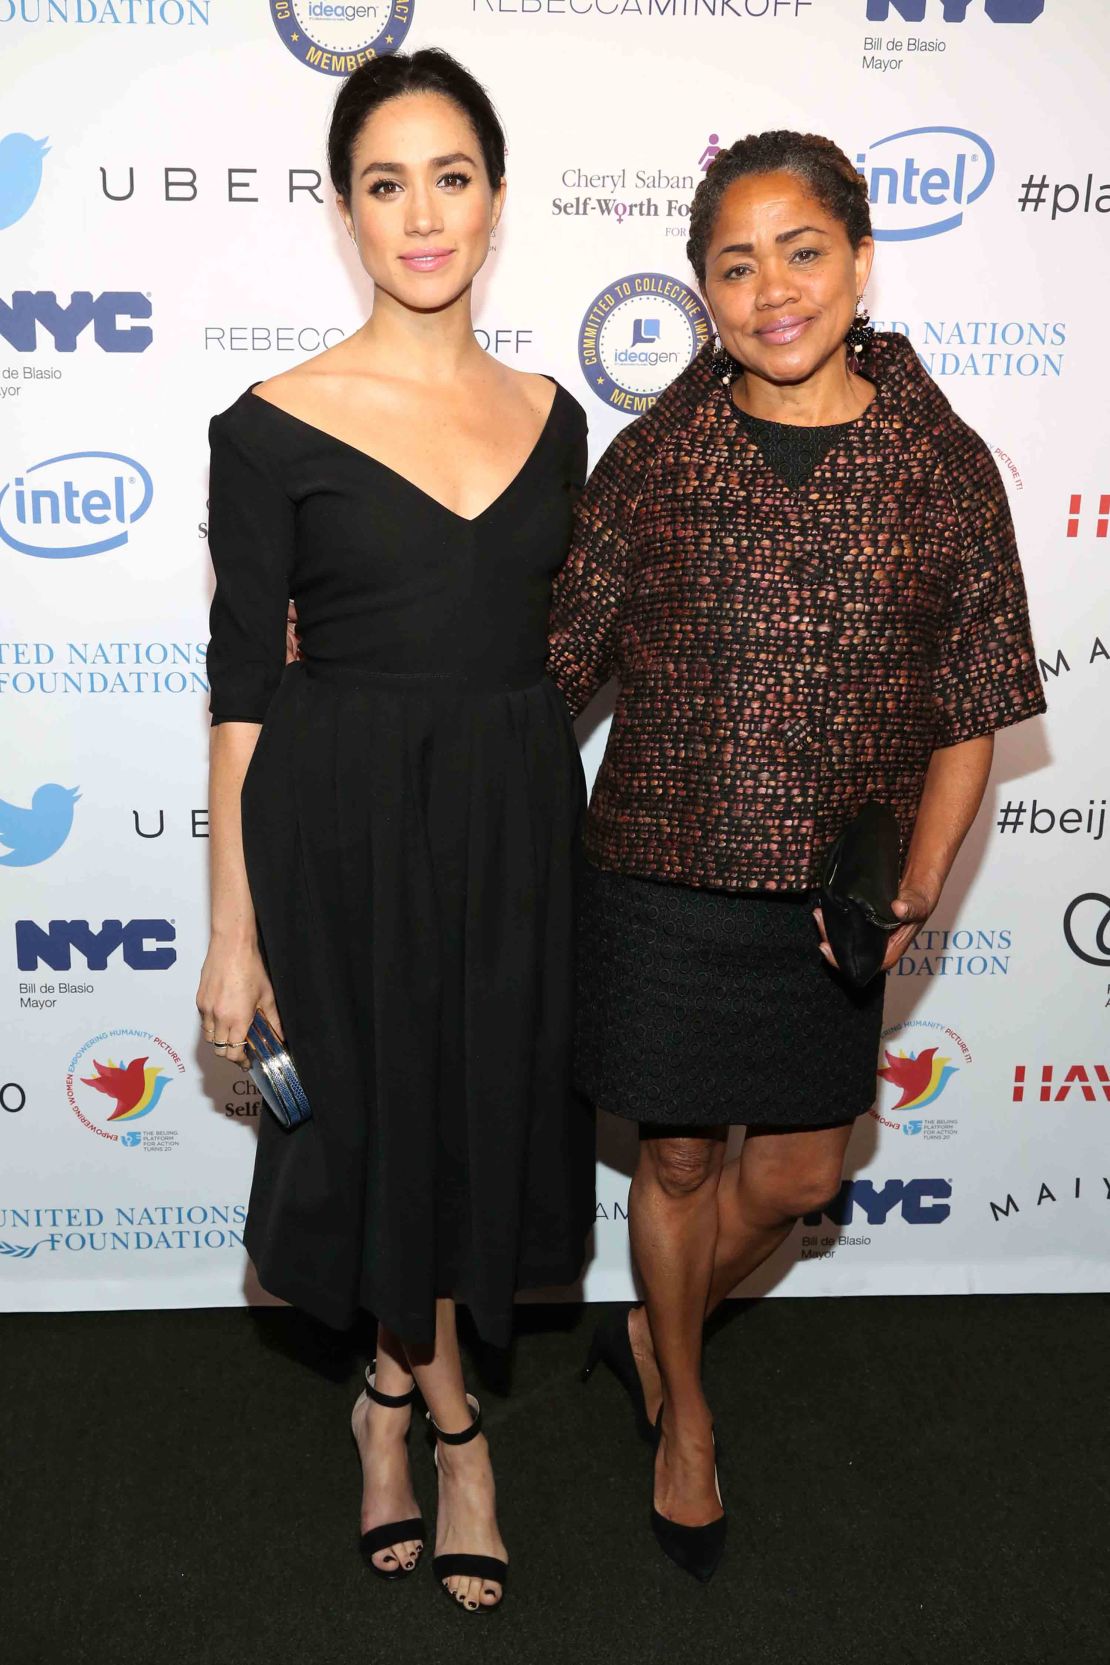 Meghan Markle attends a UN Women's event with her mother in March 2015.